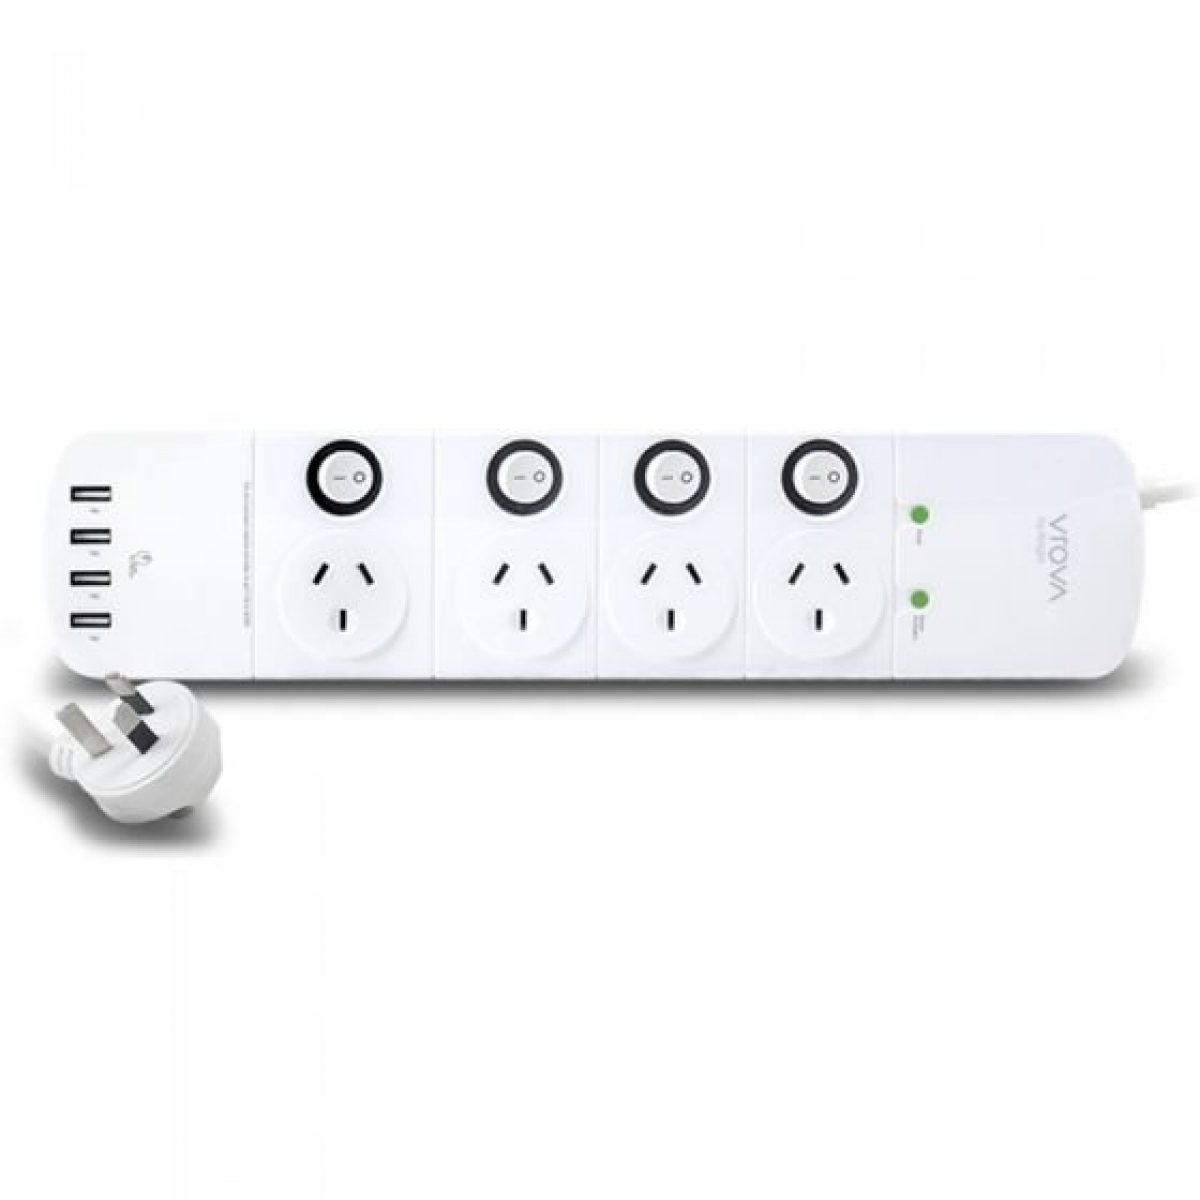 ALOGIC 4 Outlet Power Board 4xUSB Surge overload